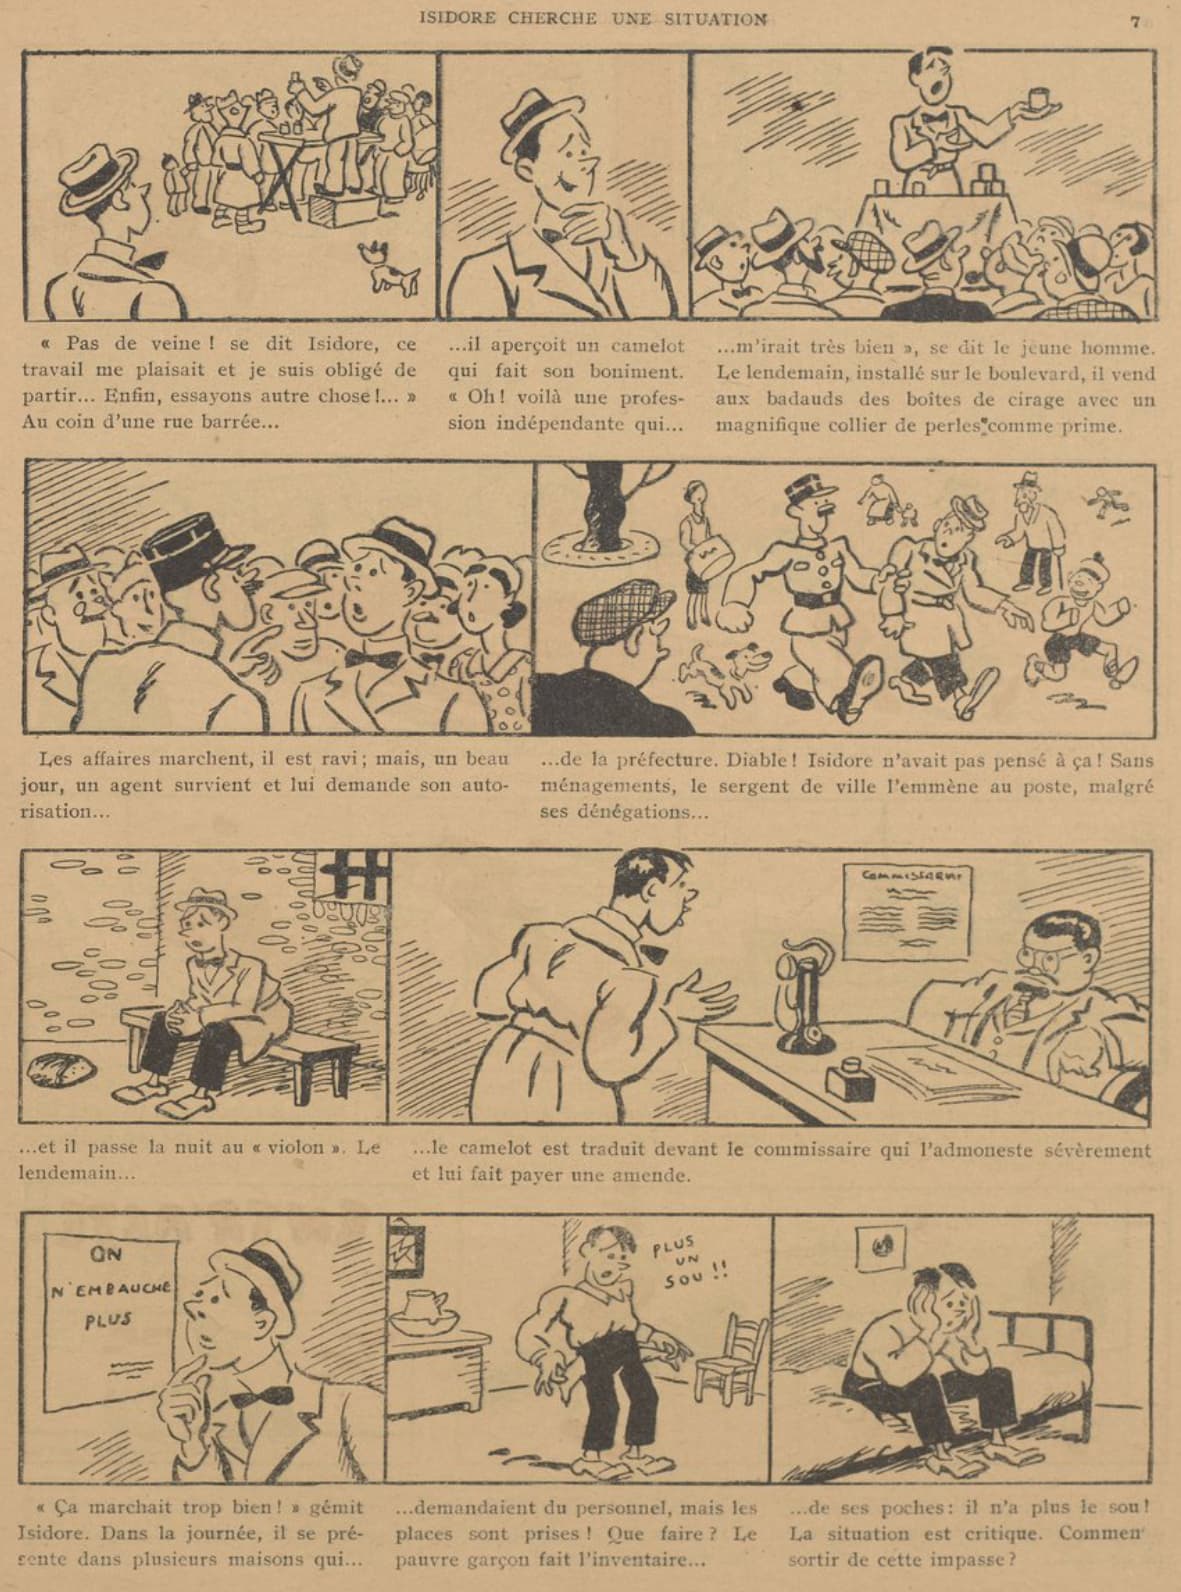 Guignol 1932 - n°190 - Isidore cherche une situation - 3 avril 1932 - page 7